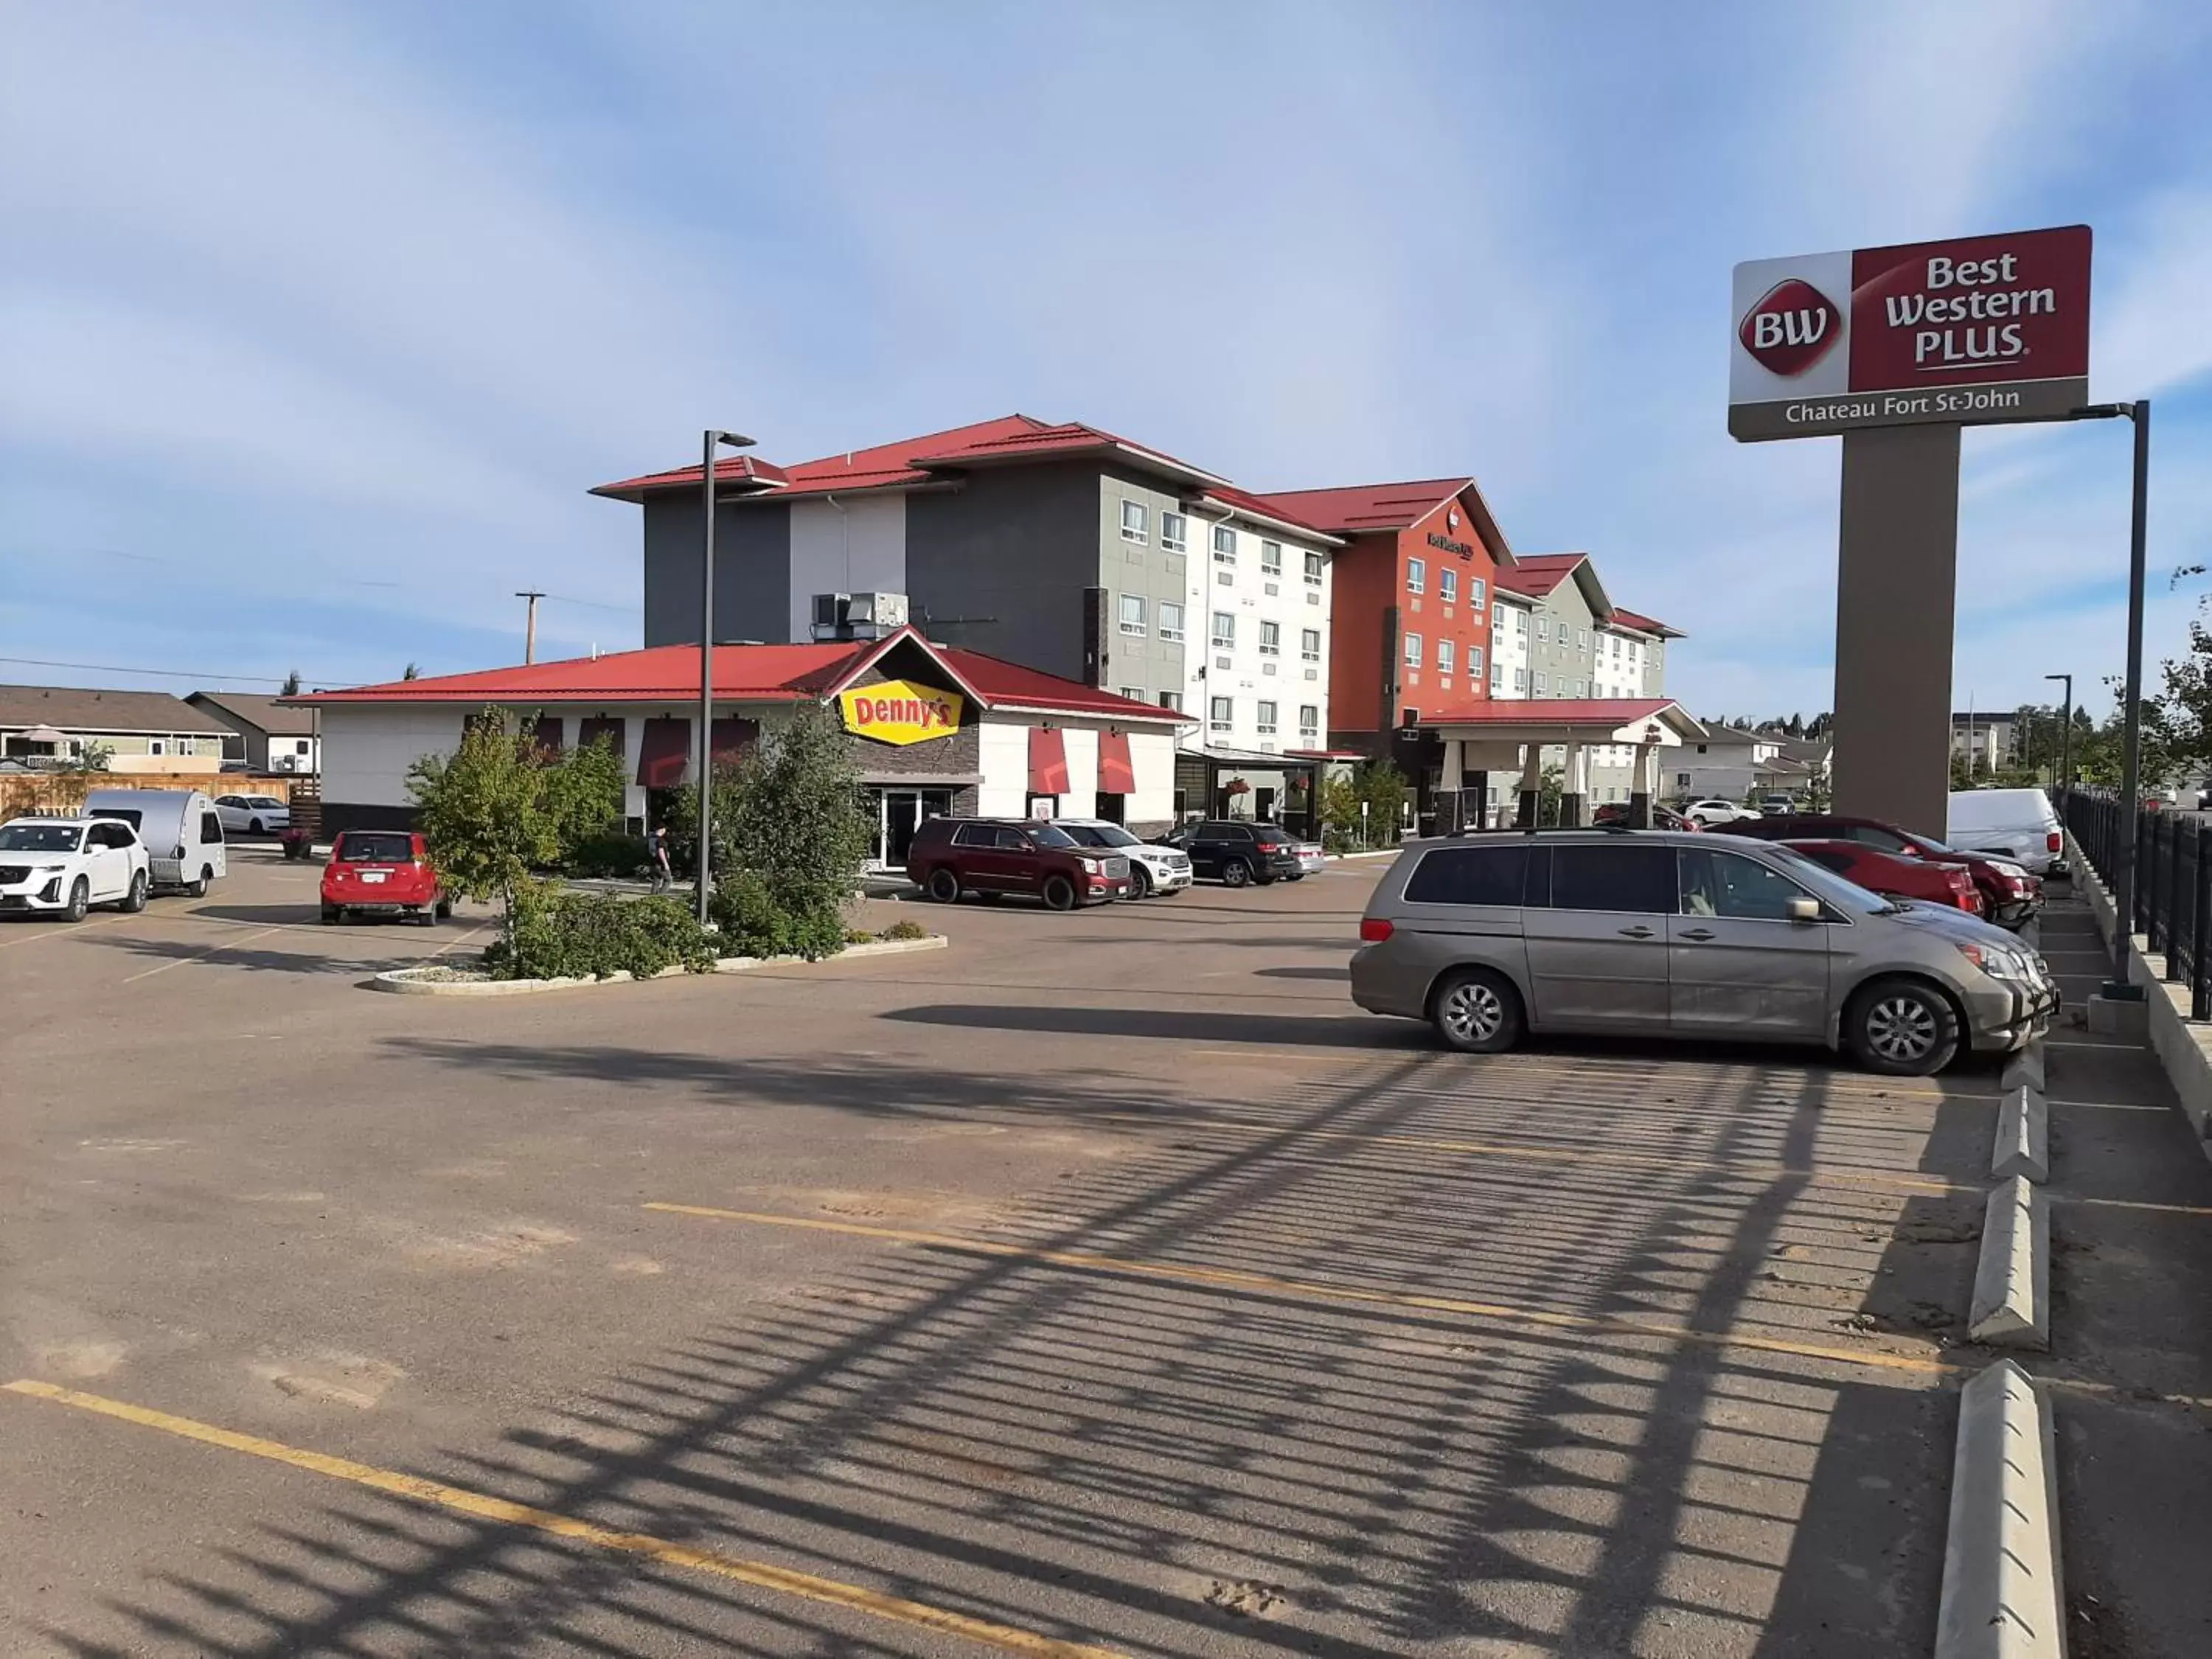 Restaurant/places to eat, Property Building in Best Western Plus Chateau Fort St. John